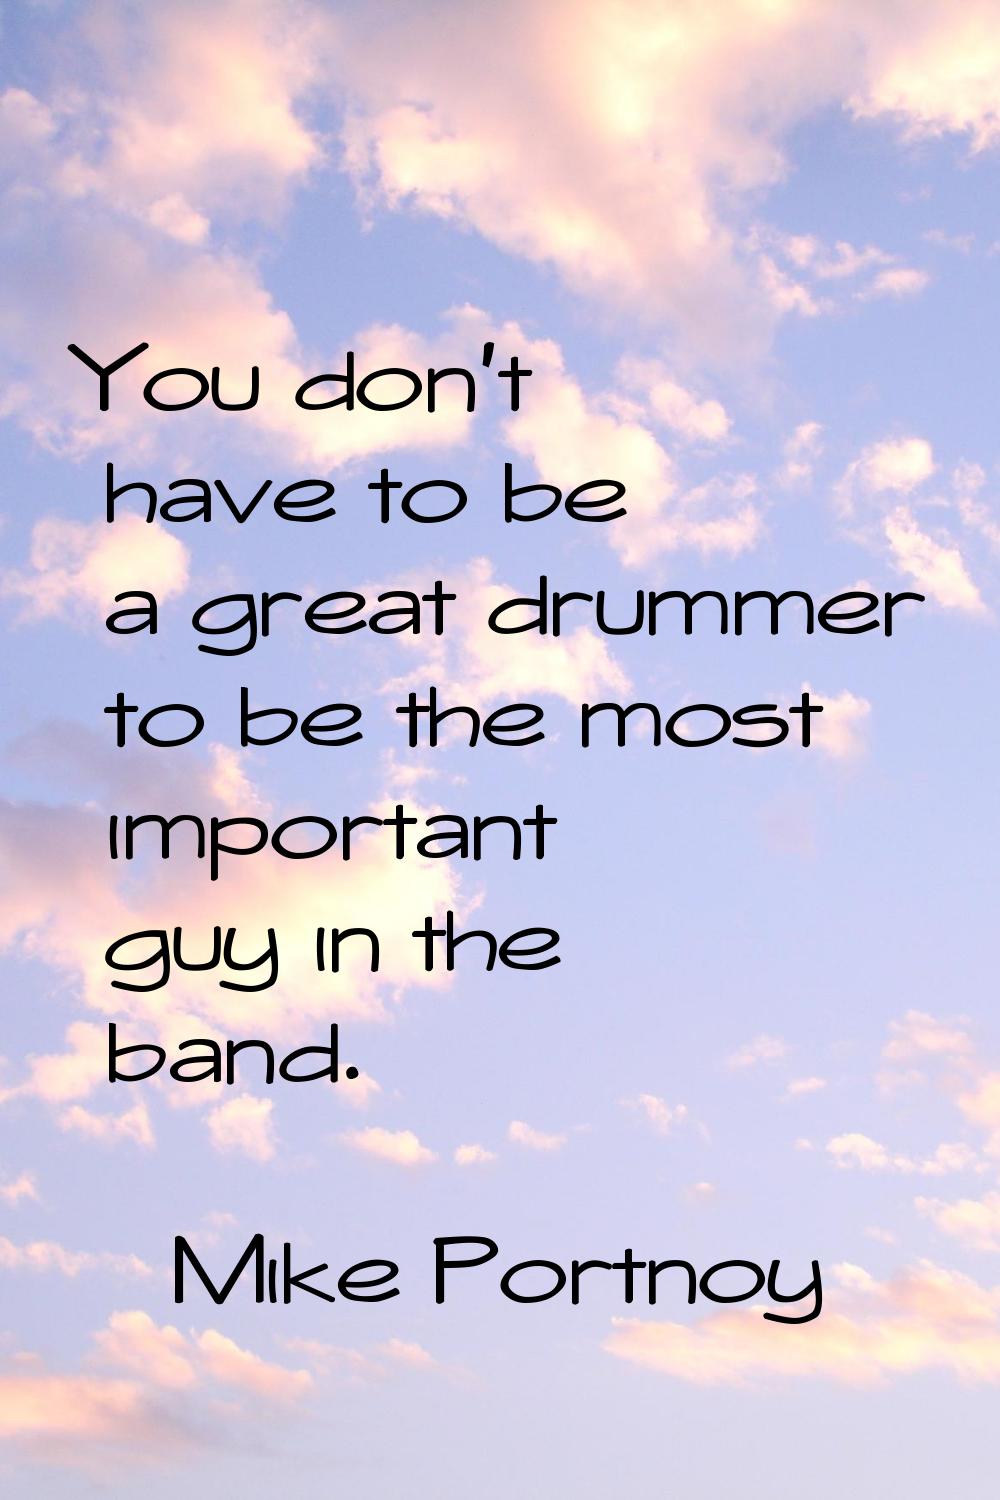 You don't have to be a great drummer to be the most important guy in the band.